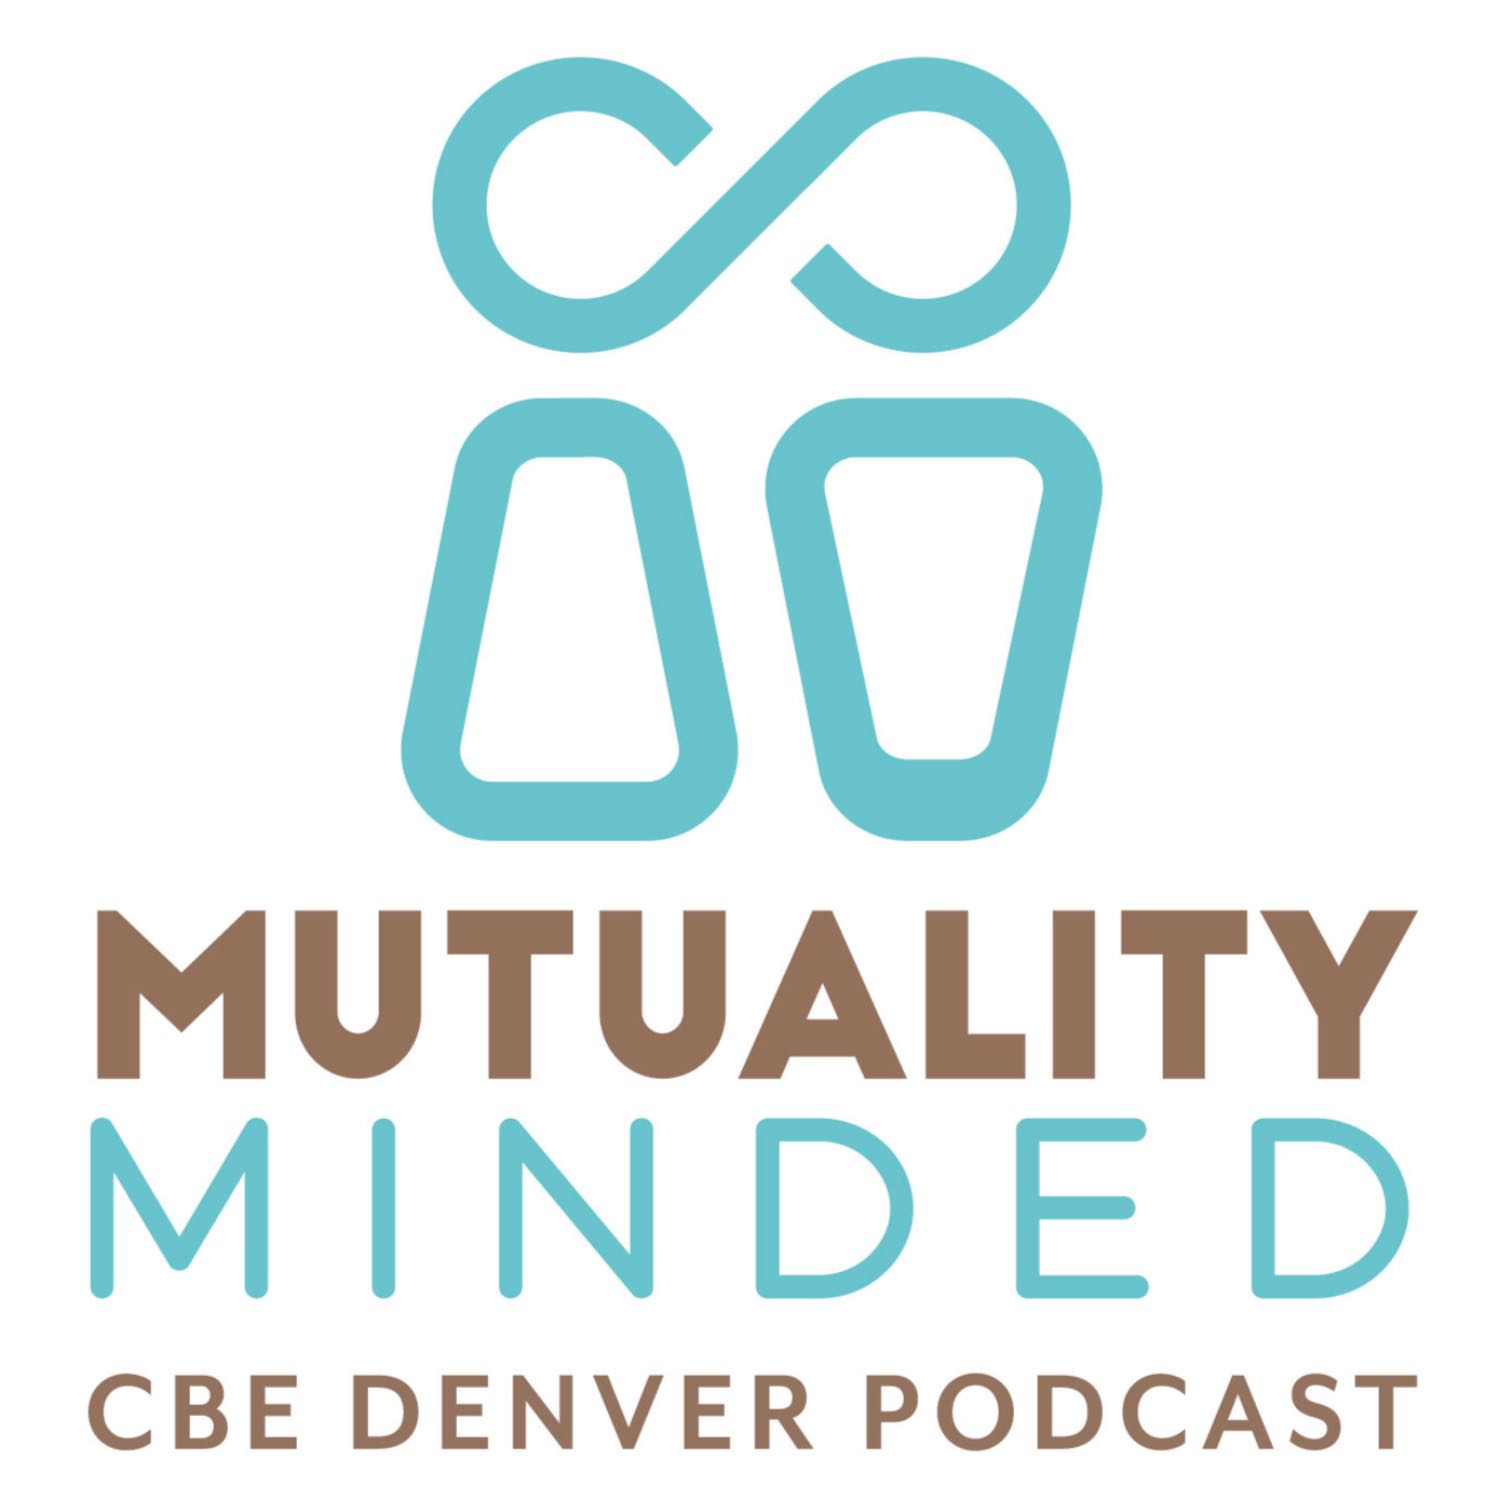 CBE Denver's Mutuality Minded